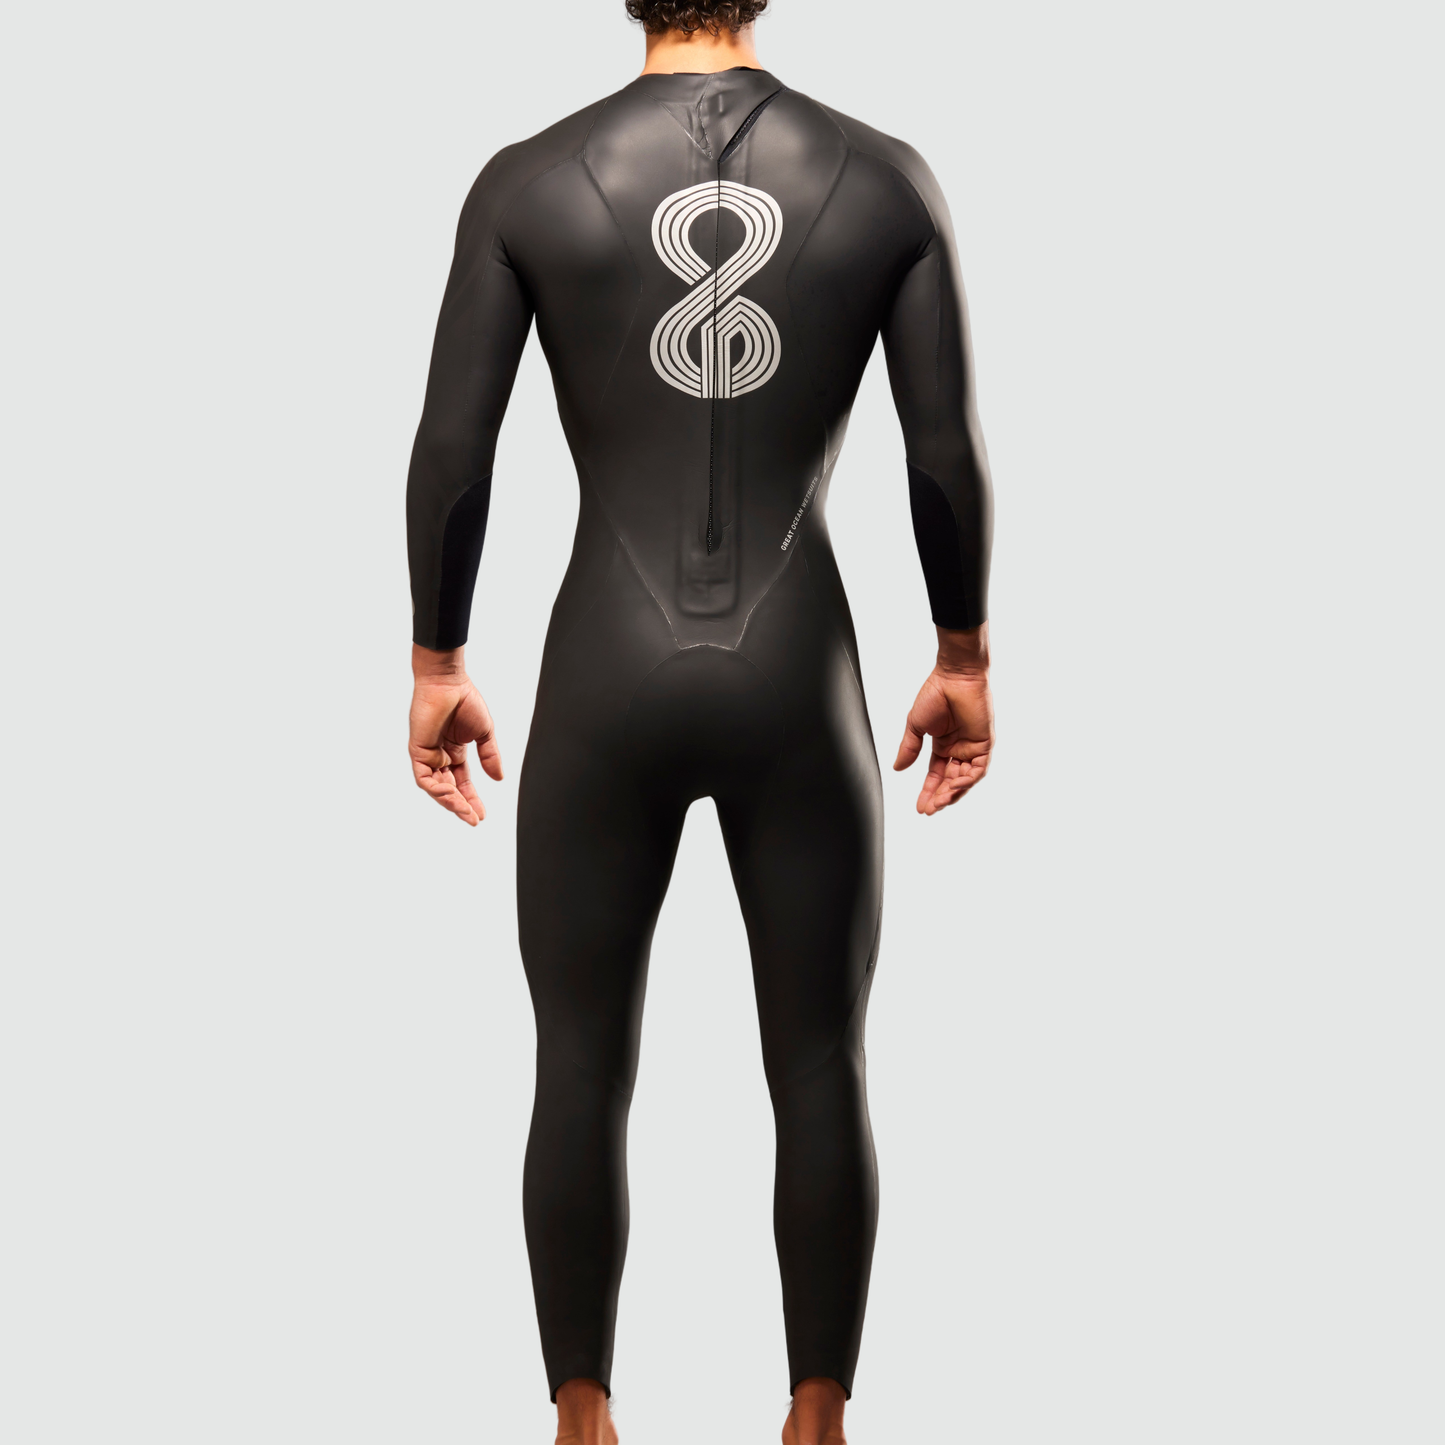 Mens Silver Wetsuit